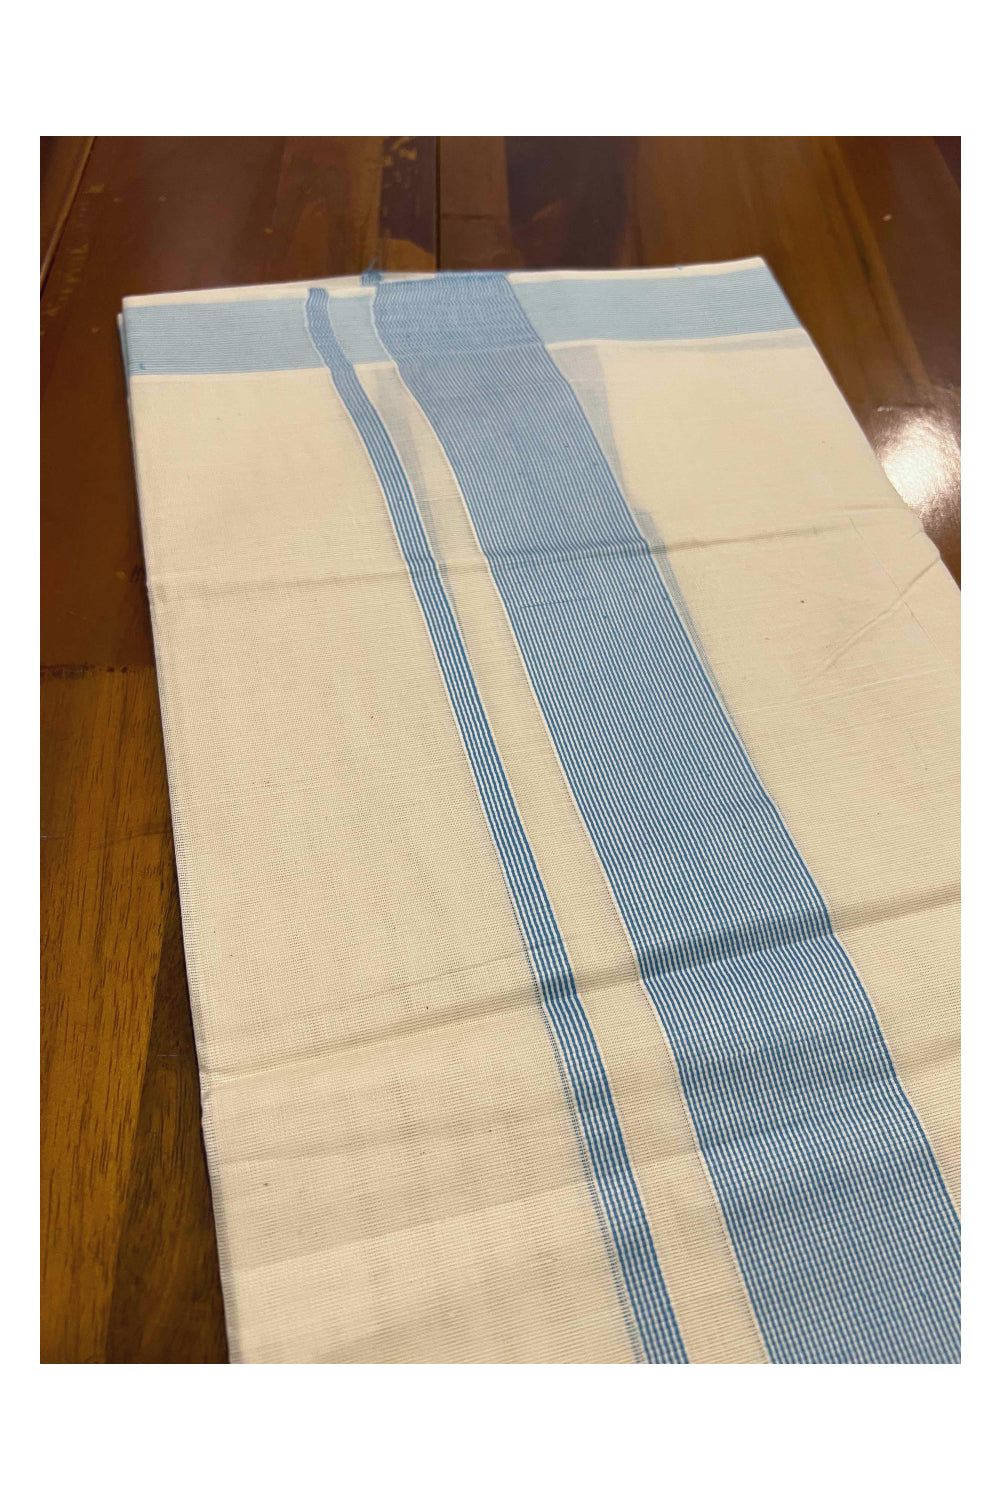 Off White Kerala Double Mundu with 2 inch Light Blue Line Border (South Indian Dhoti)